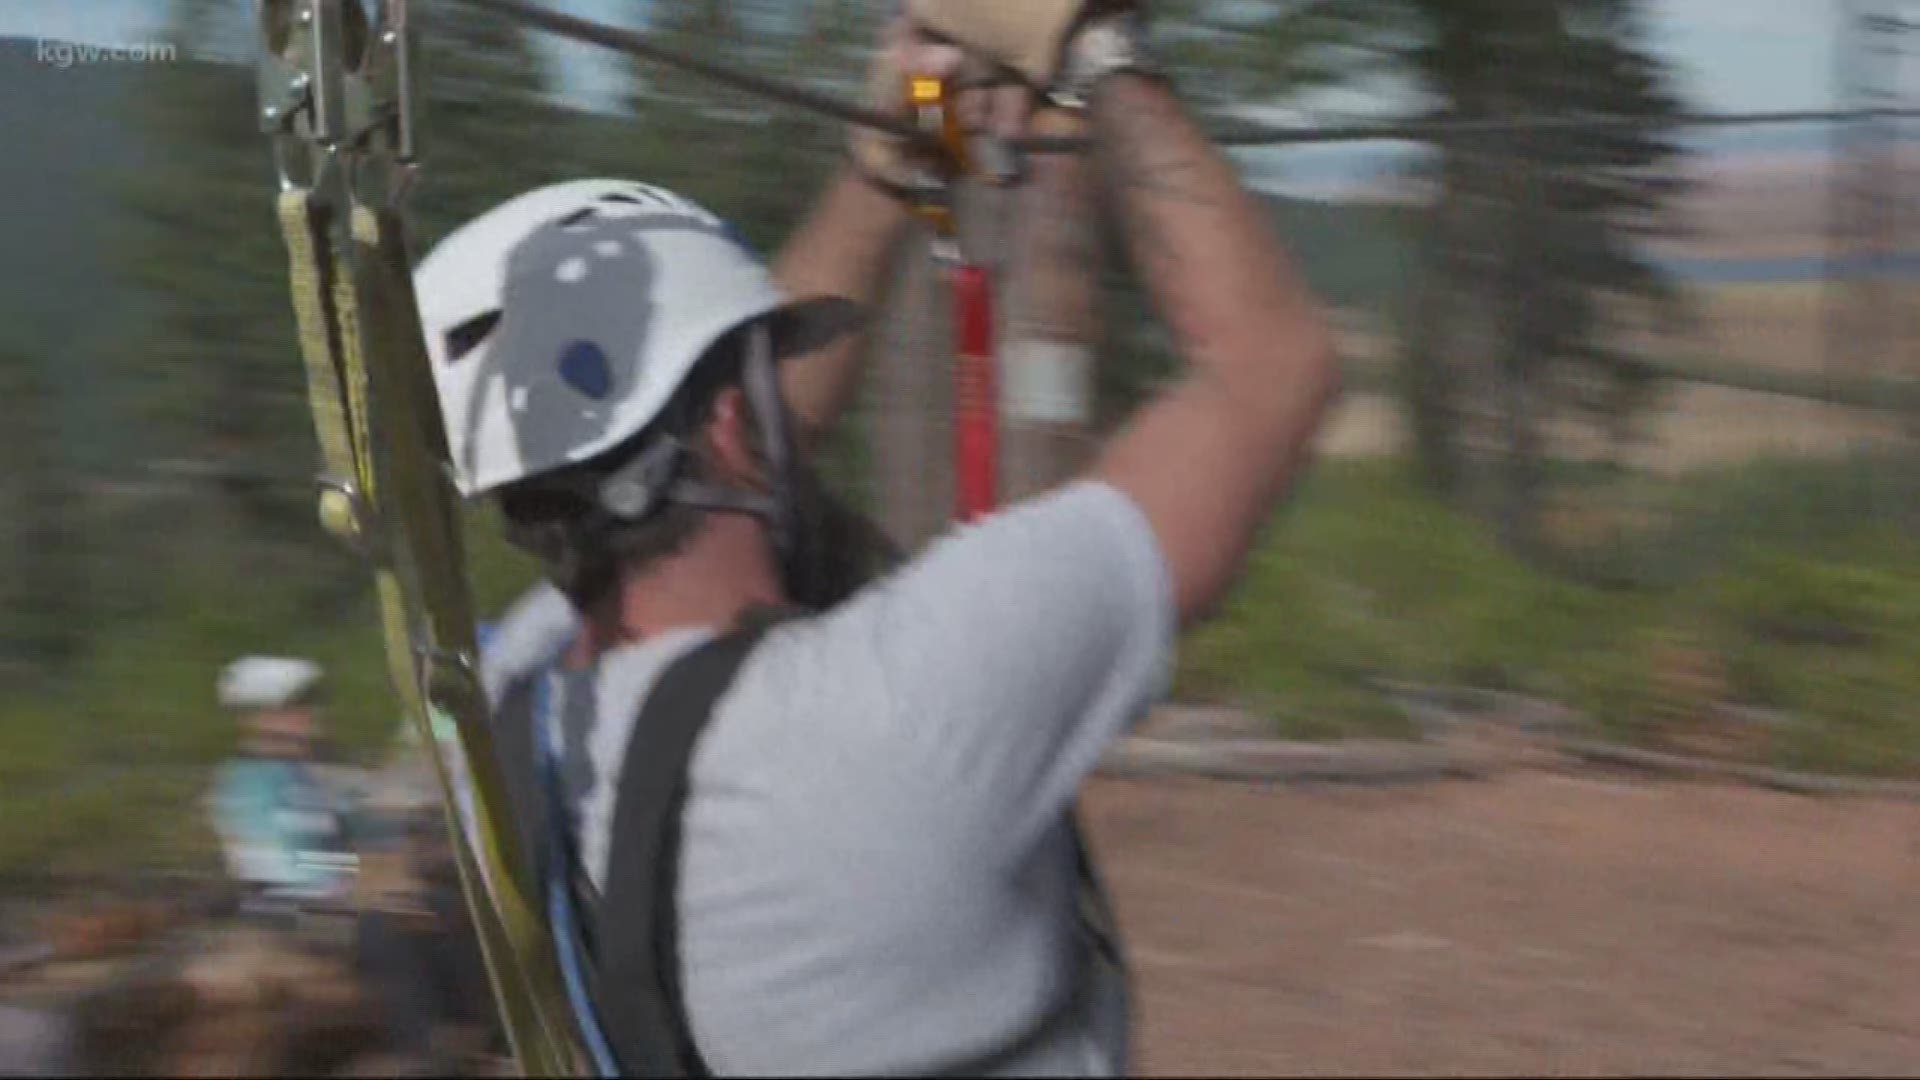 Grant McOmie takes us on a zipline adventure down by Crater Lake National Park.